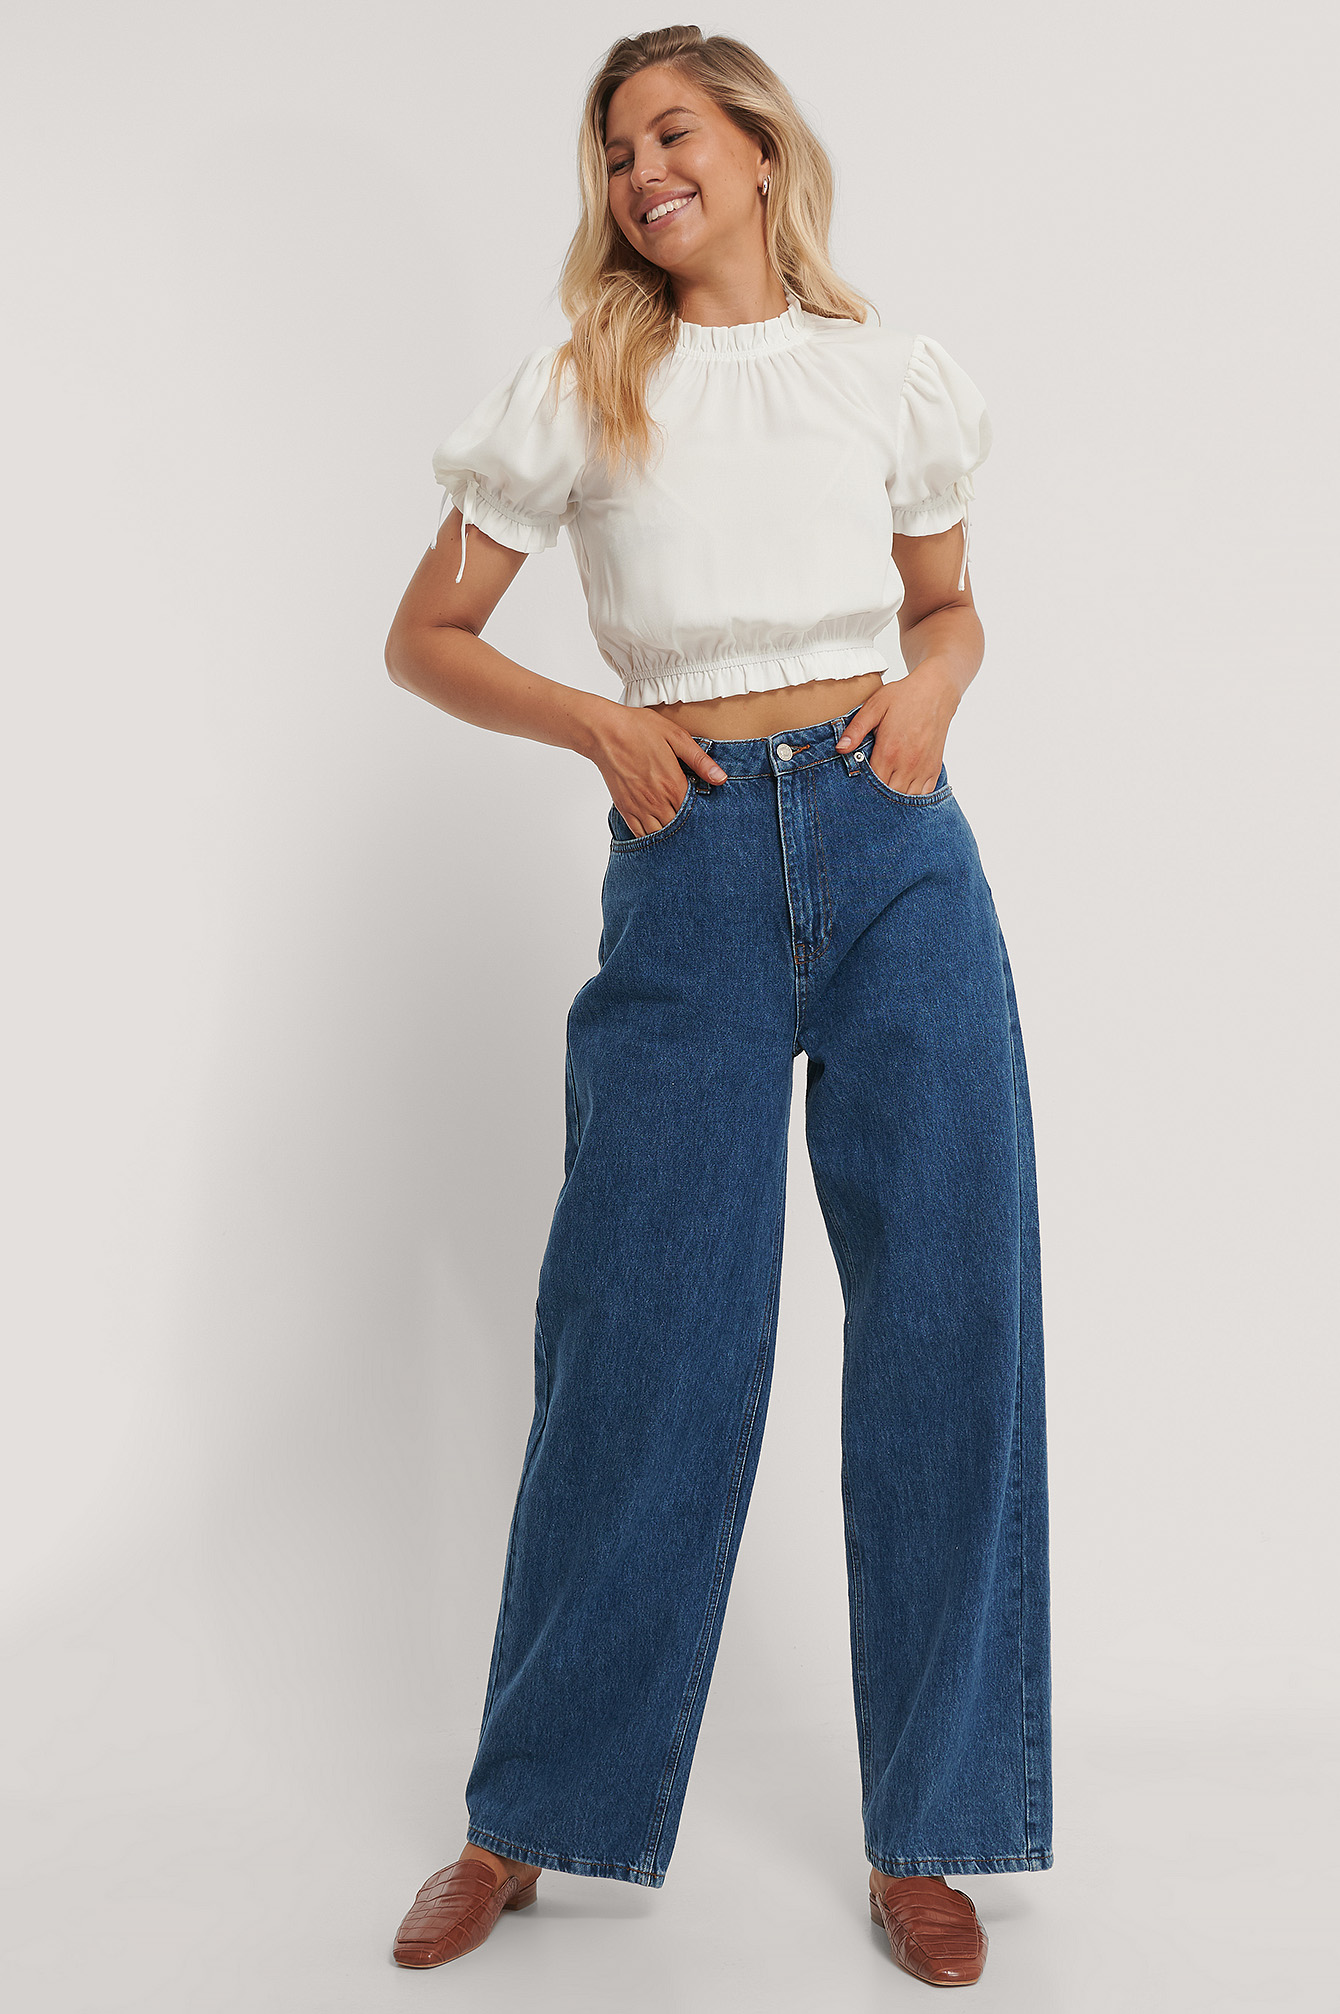 White Cropped Frill Neck Top